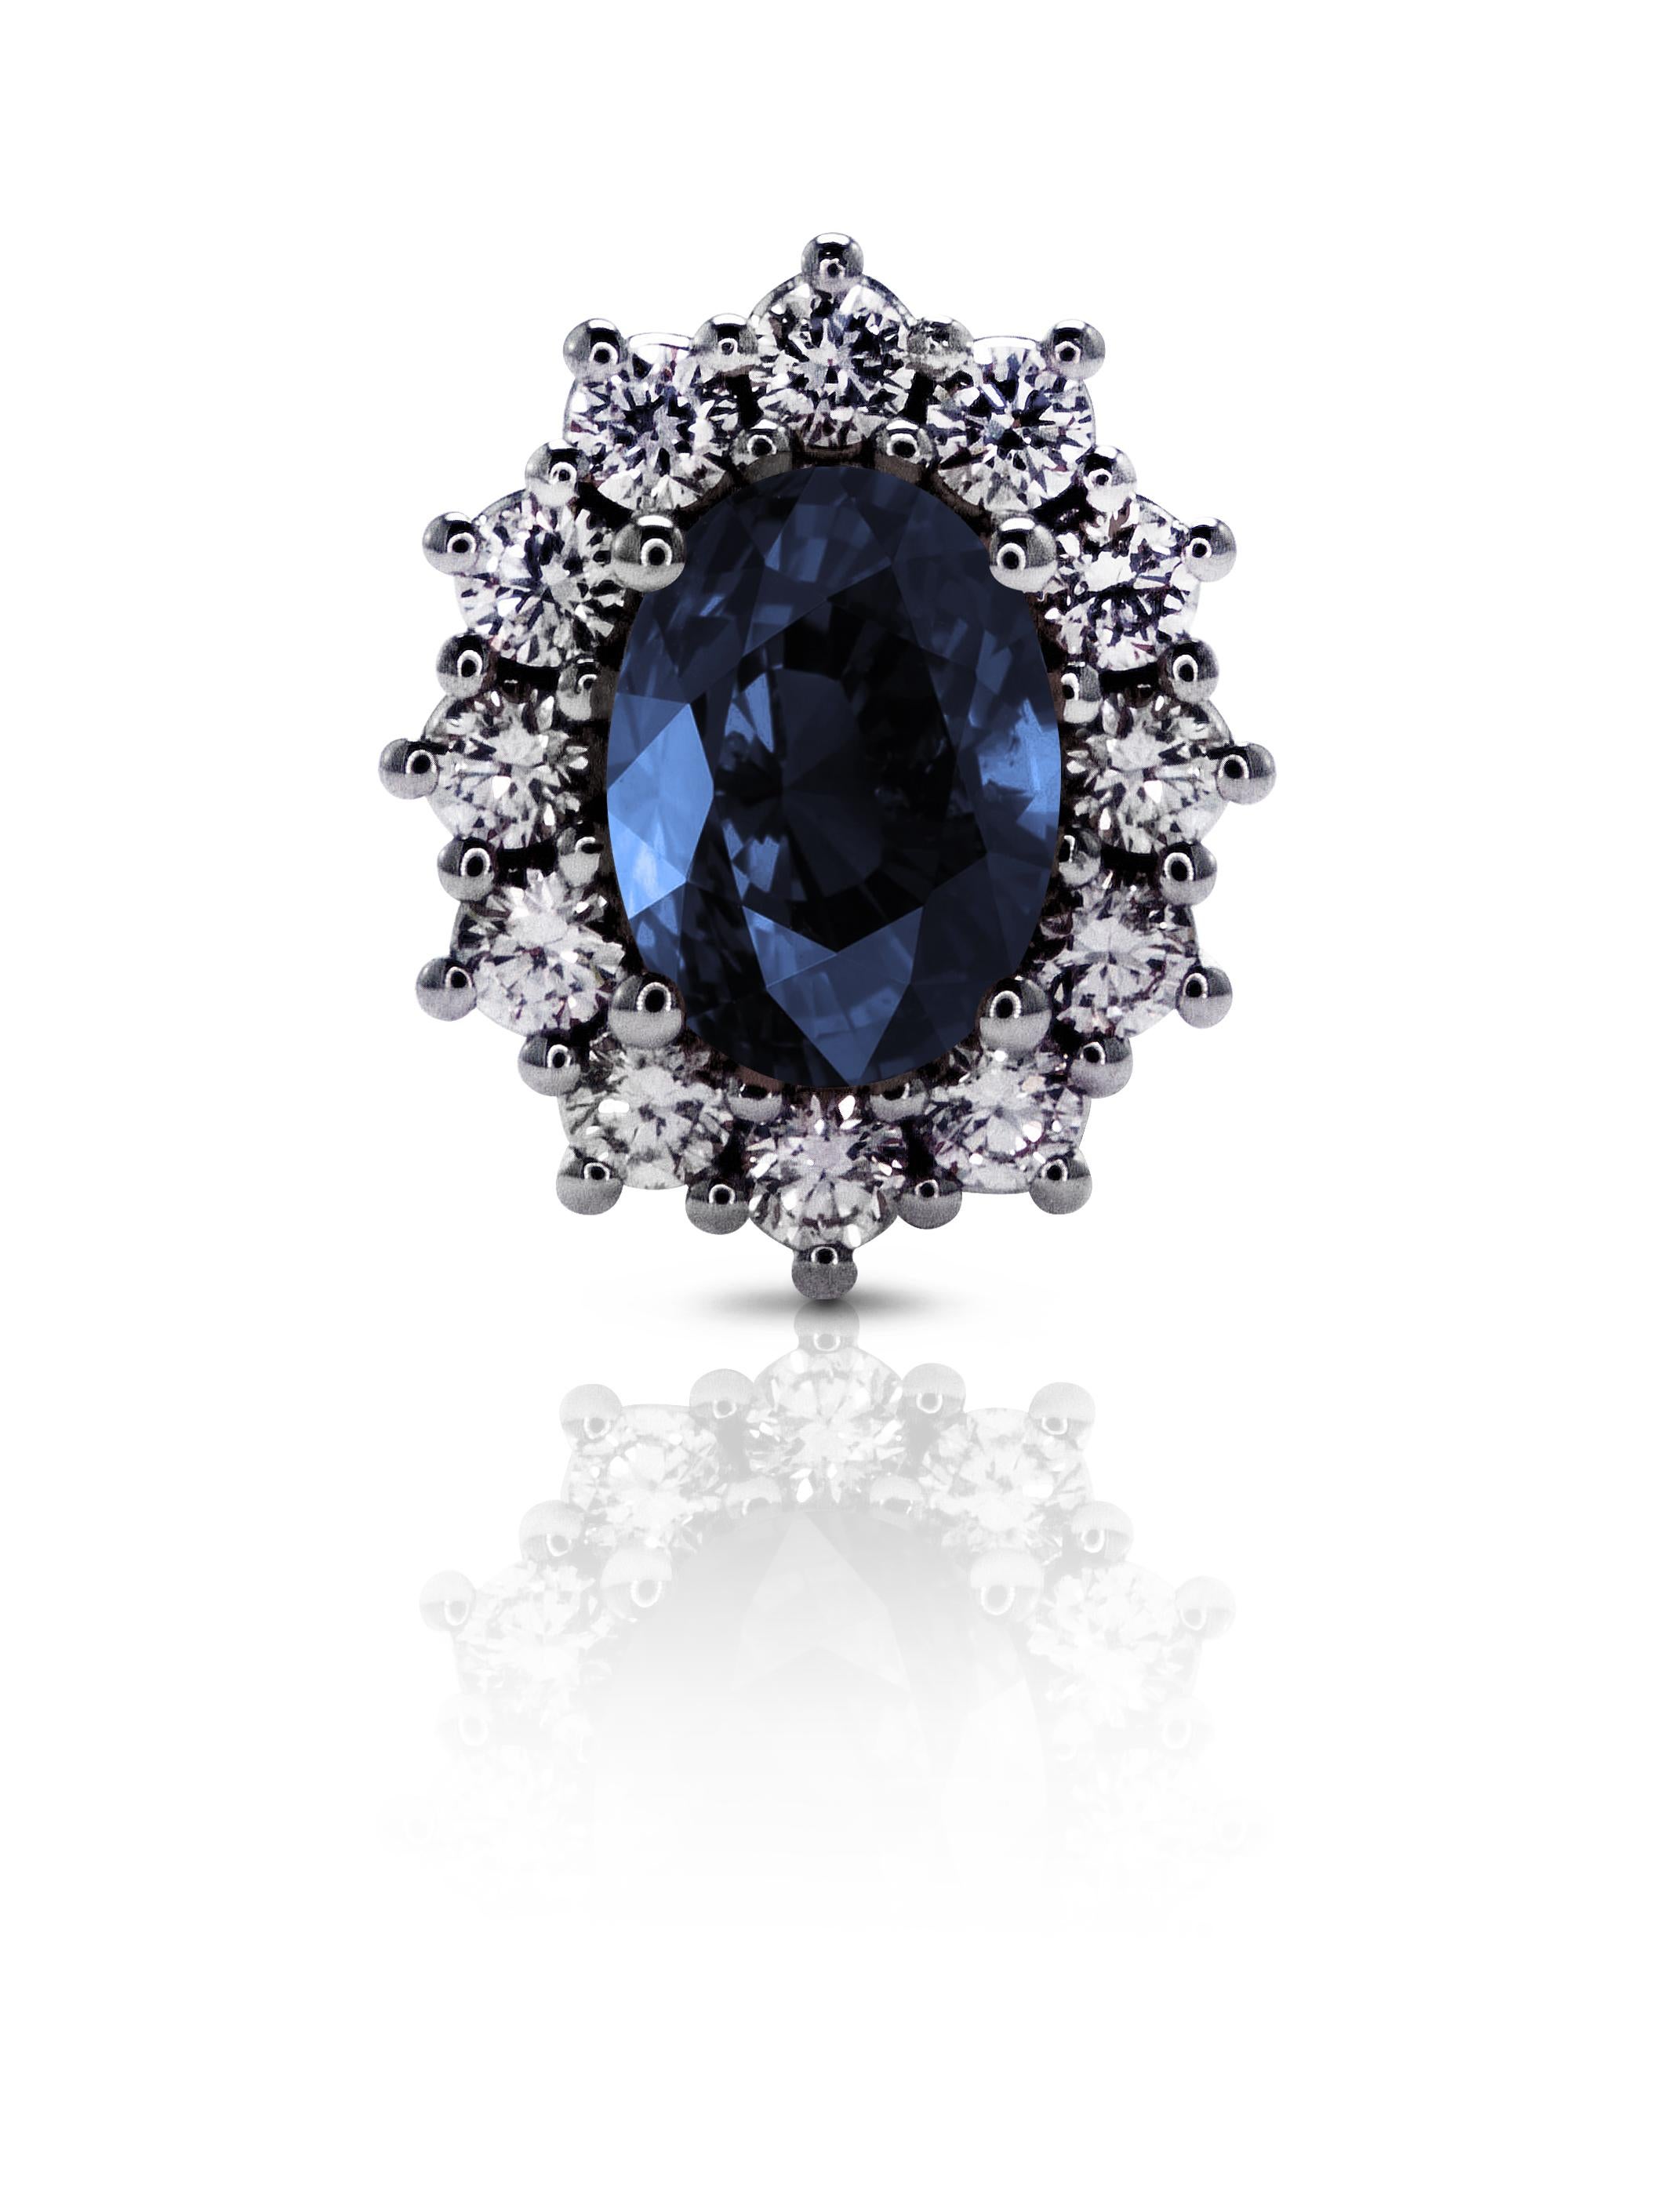 These 1.68 Carat Blue Sapphire and Diamond Sunflower Chic Stud Earrings are set in 18Kt White Gold and from the Sunflower Chic collection. 

The earrings are designed with the Sunflower concept, setting the Blue Sapphire in the bud and surrounding